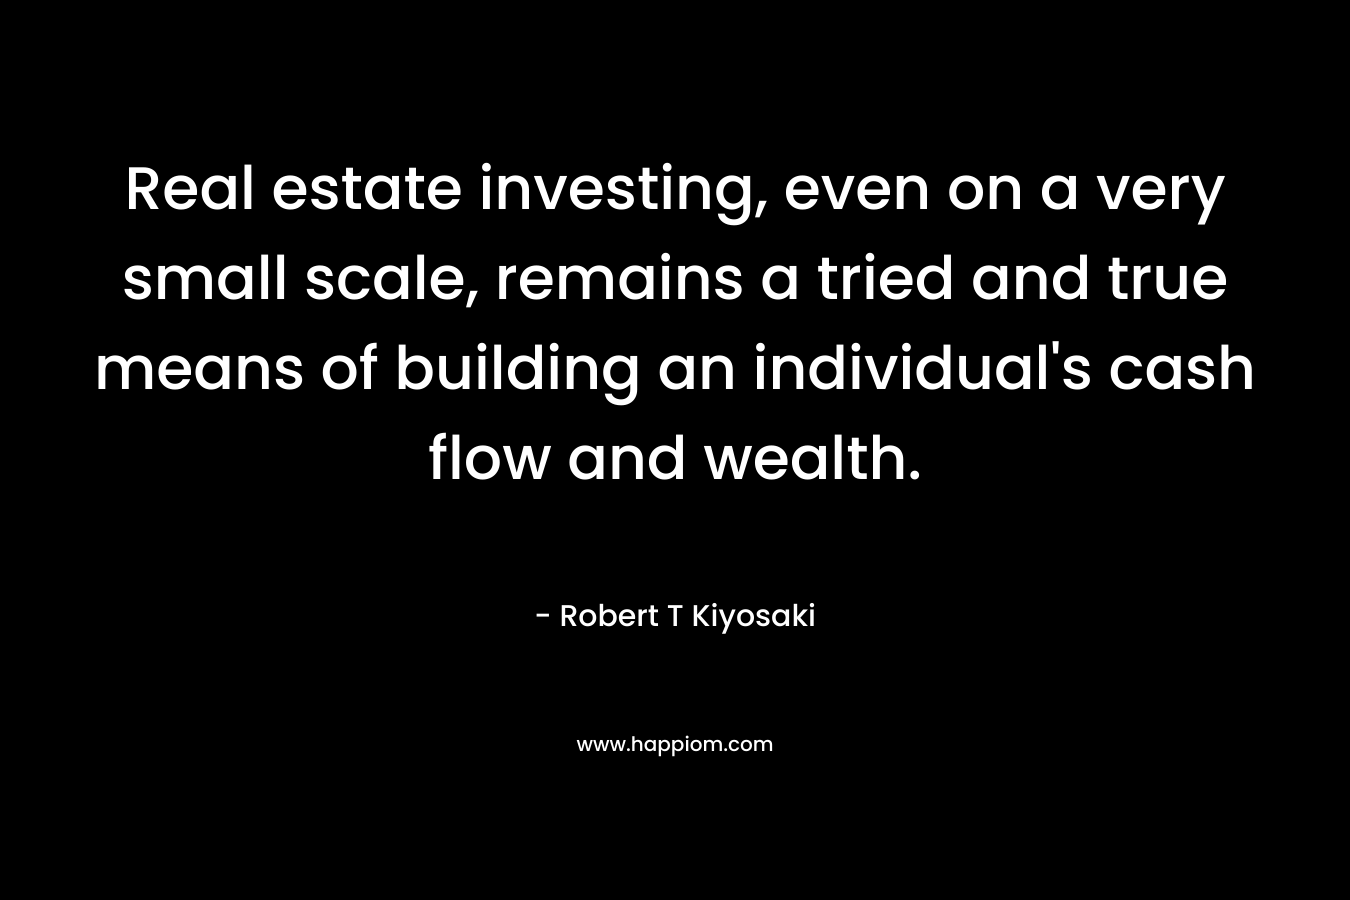 Real estate investing, even on a very small scale, remains a tried and true means of building an individual’s cash flow and wealth. – Robert T Kiyosaki